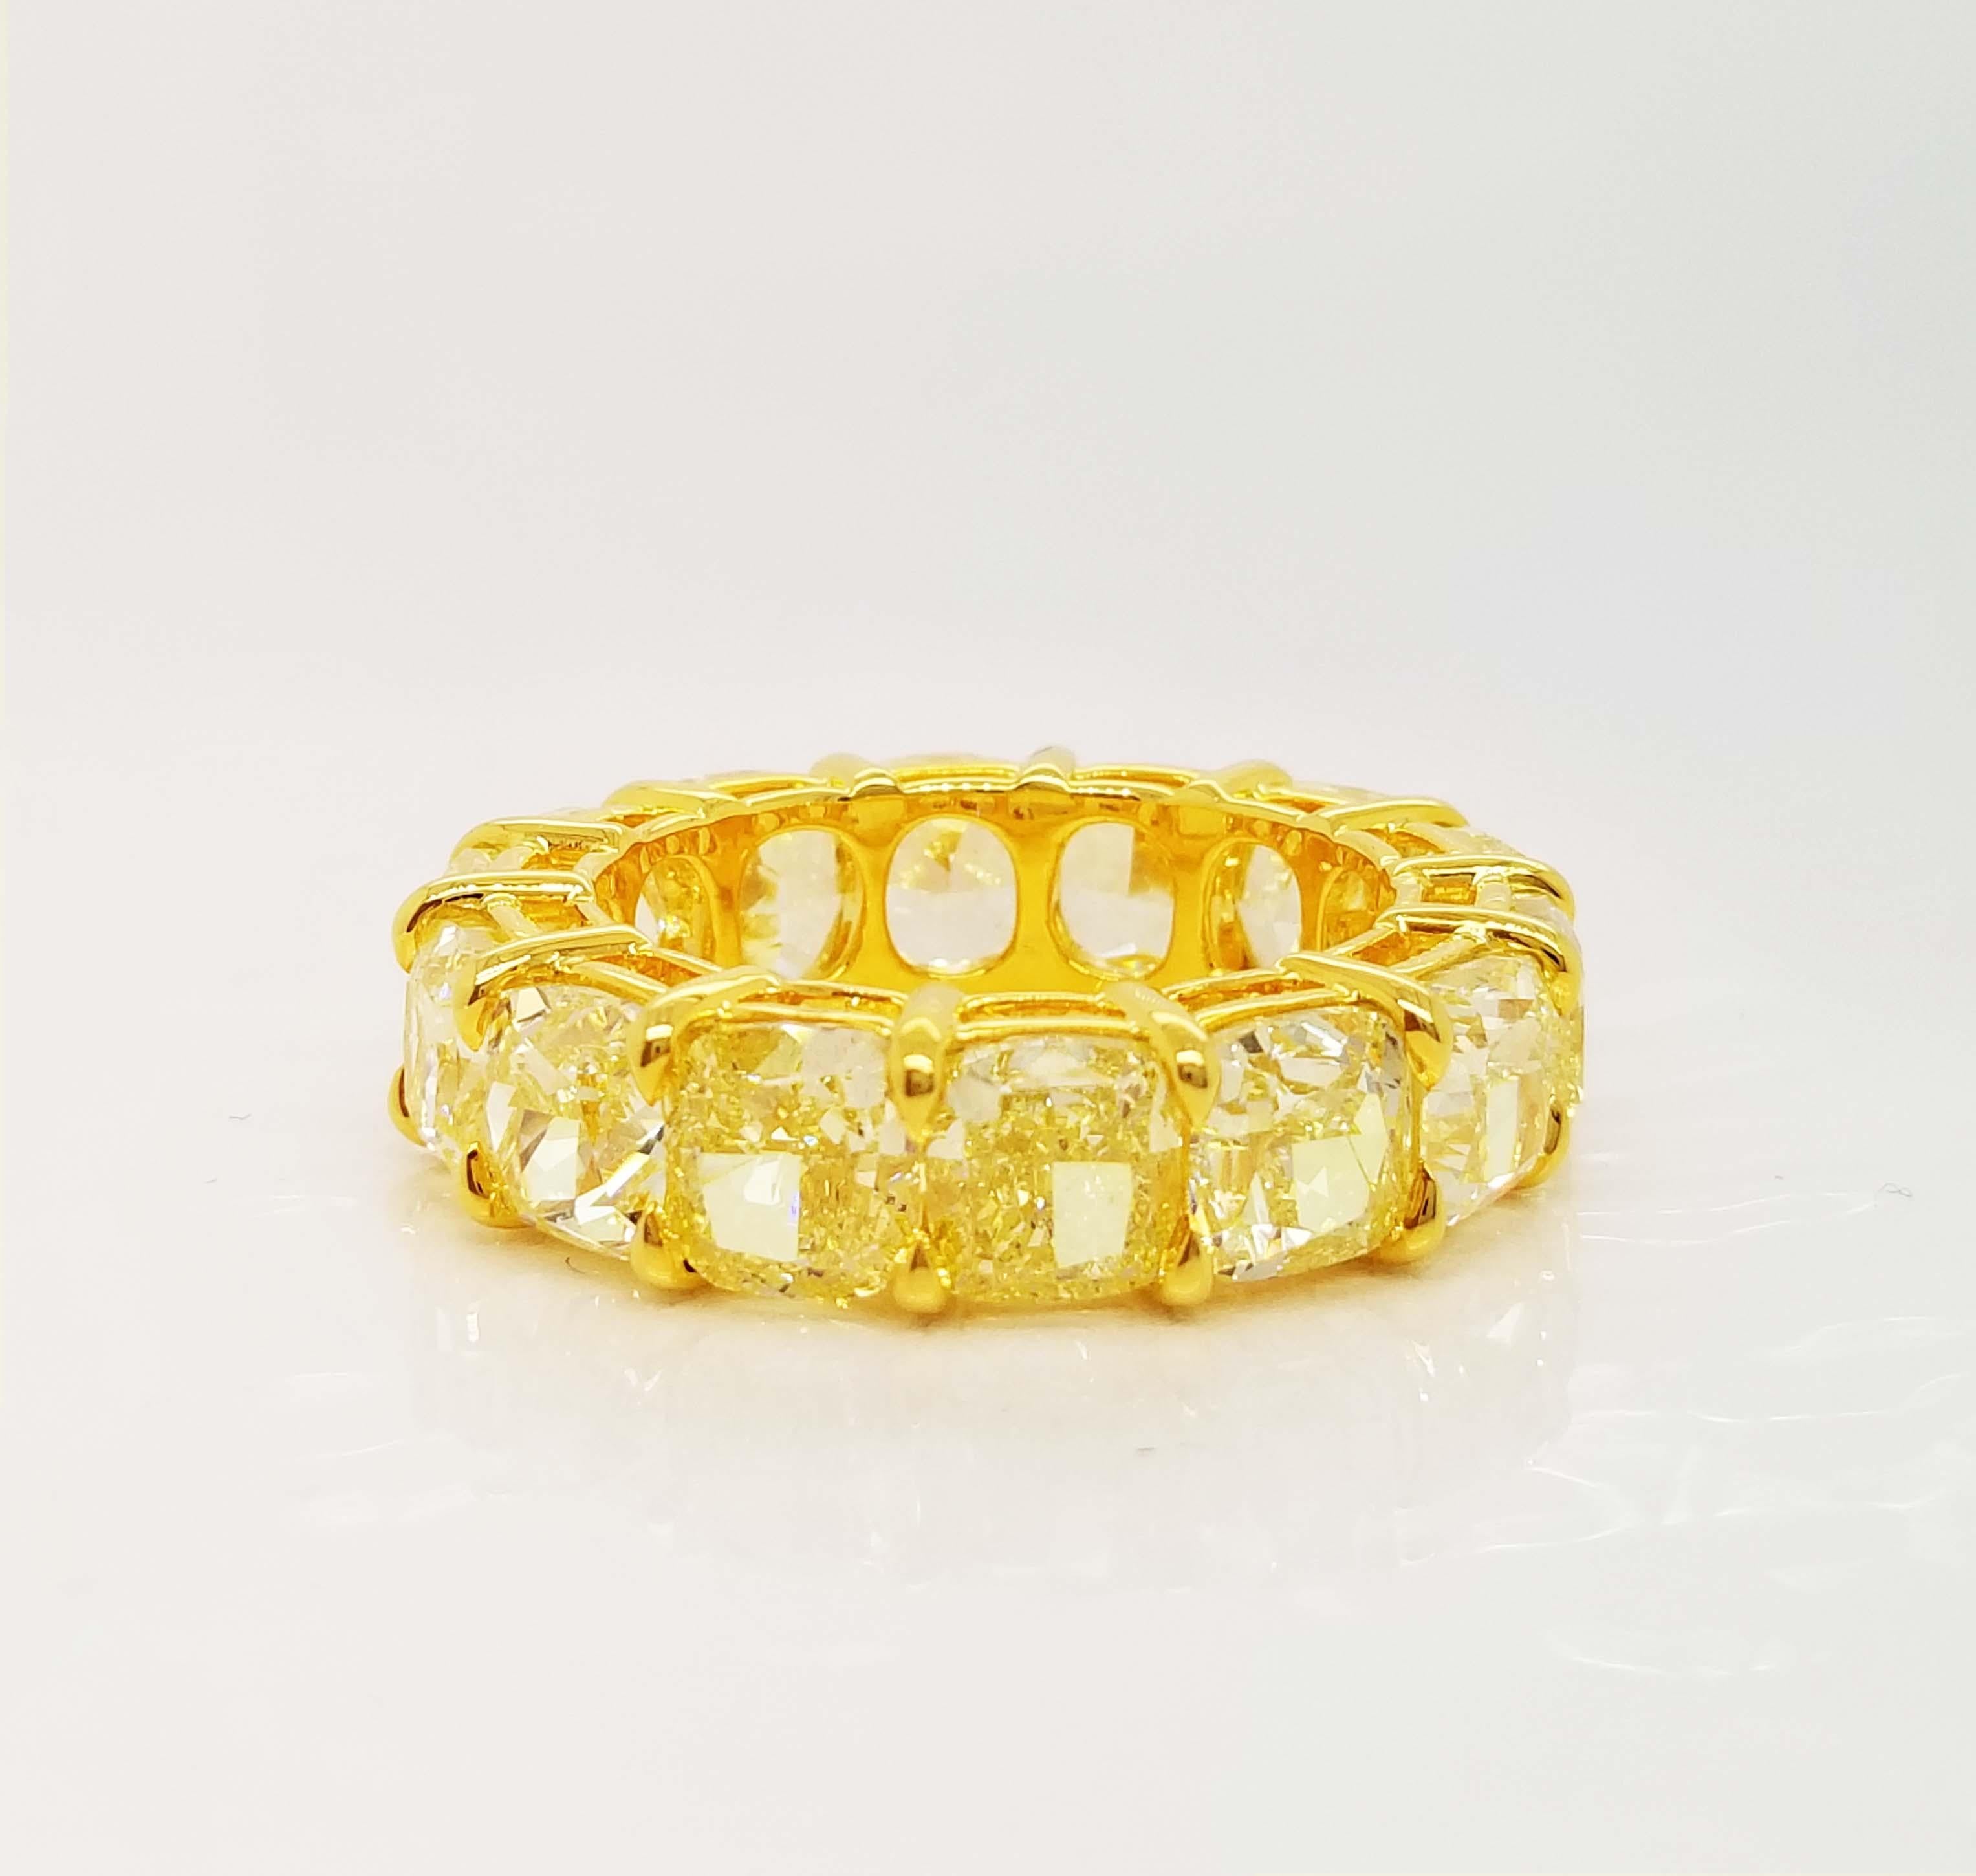 Contemporary Scarselli Fancy Yellow Cushion Diamond Eternity Band in 18k Gold, GIA Certified